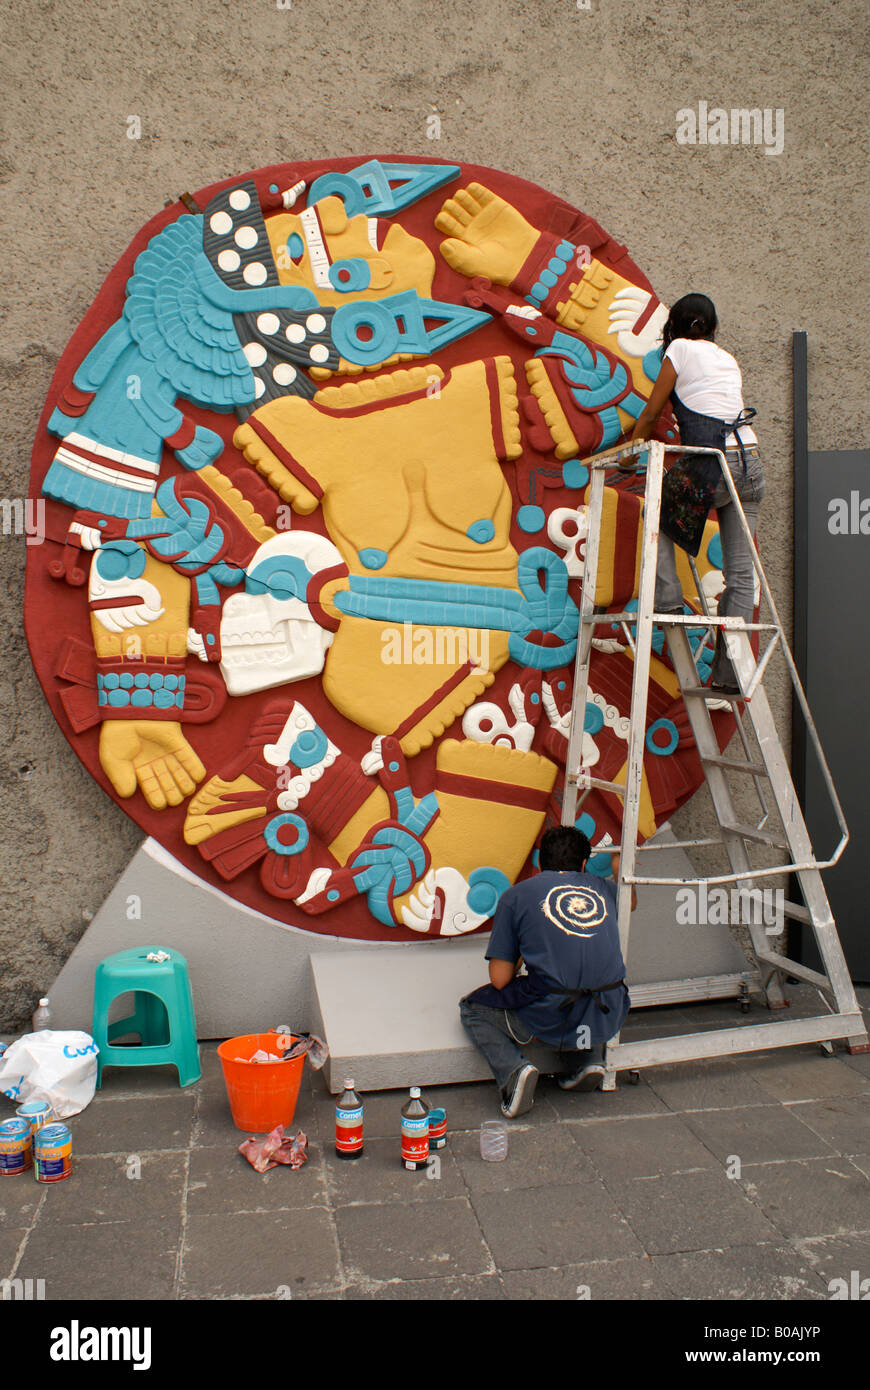 Painters working on replica of stone showing dismembered Aztec goddess Coyolxauhqui, Museo del Templo Mayor, Mexico City Stock Photo